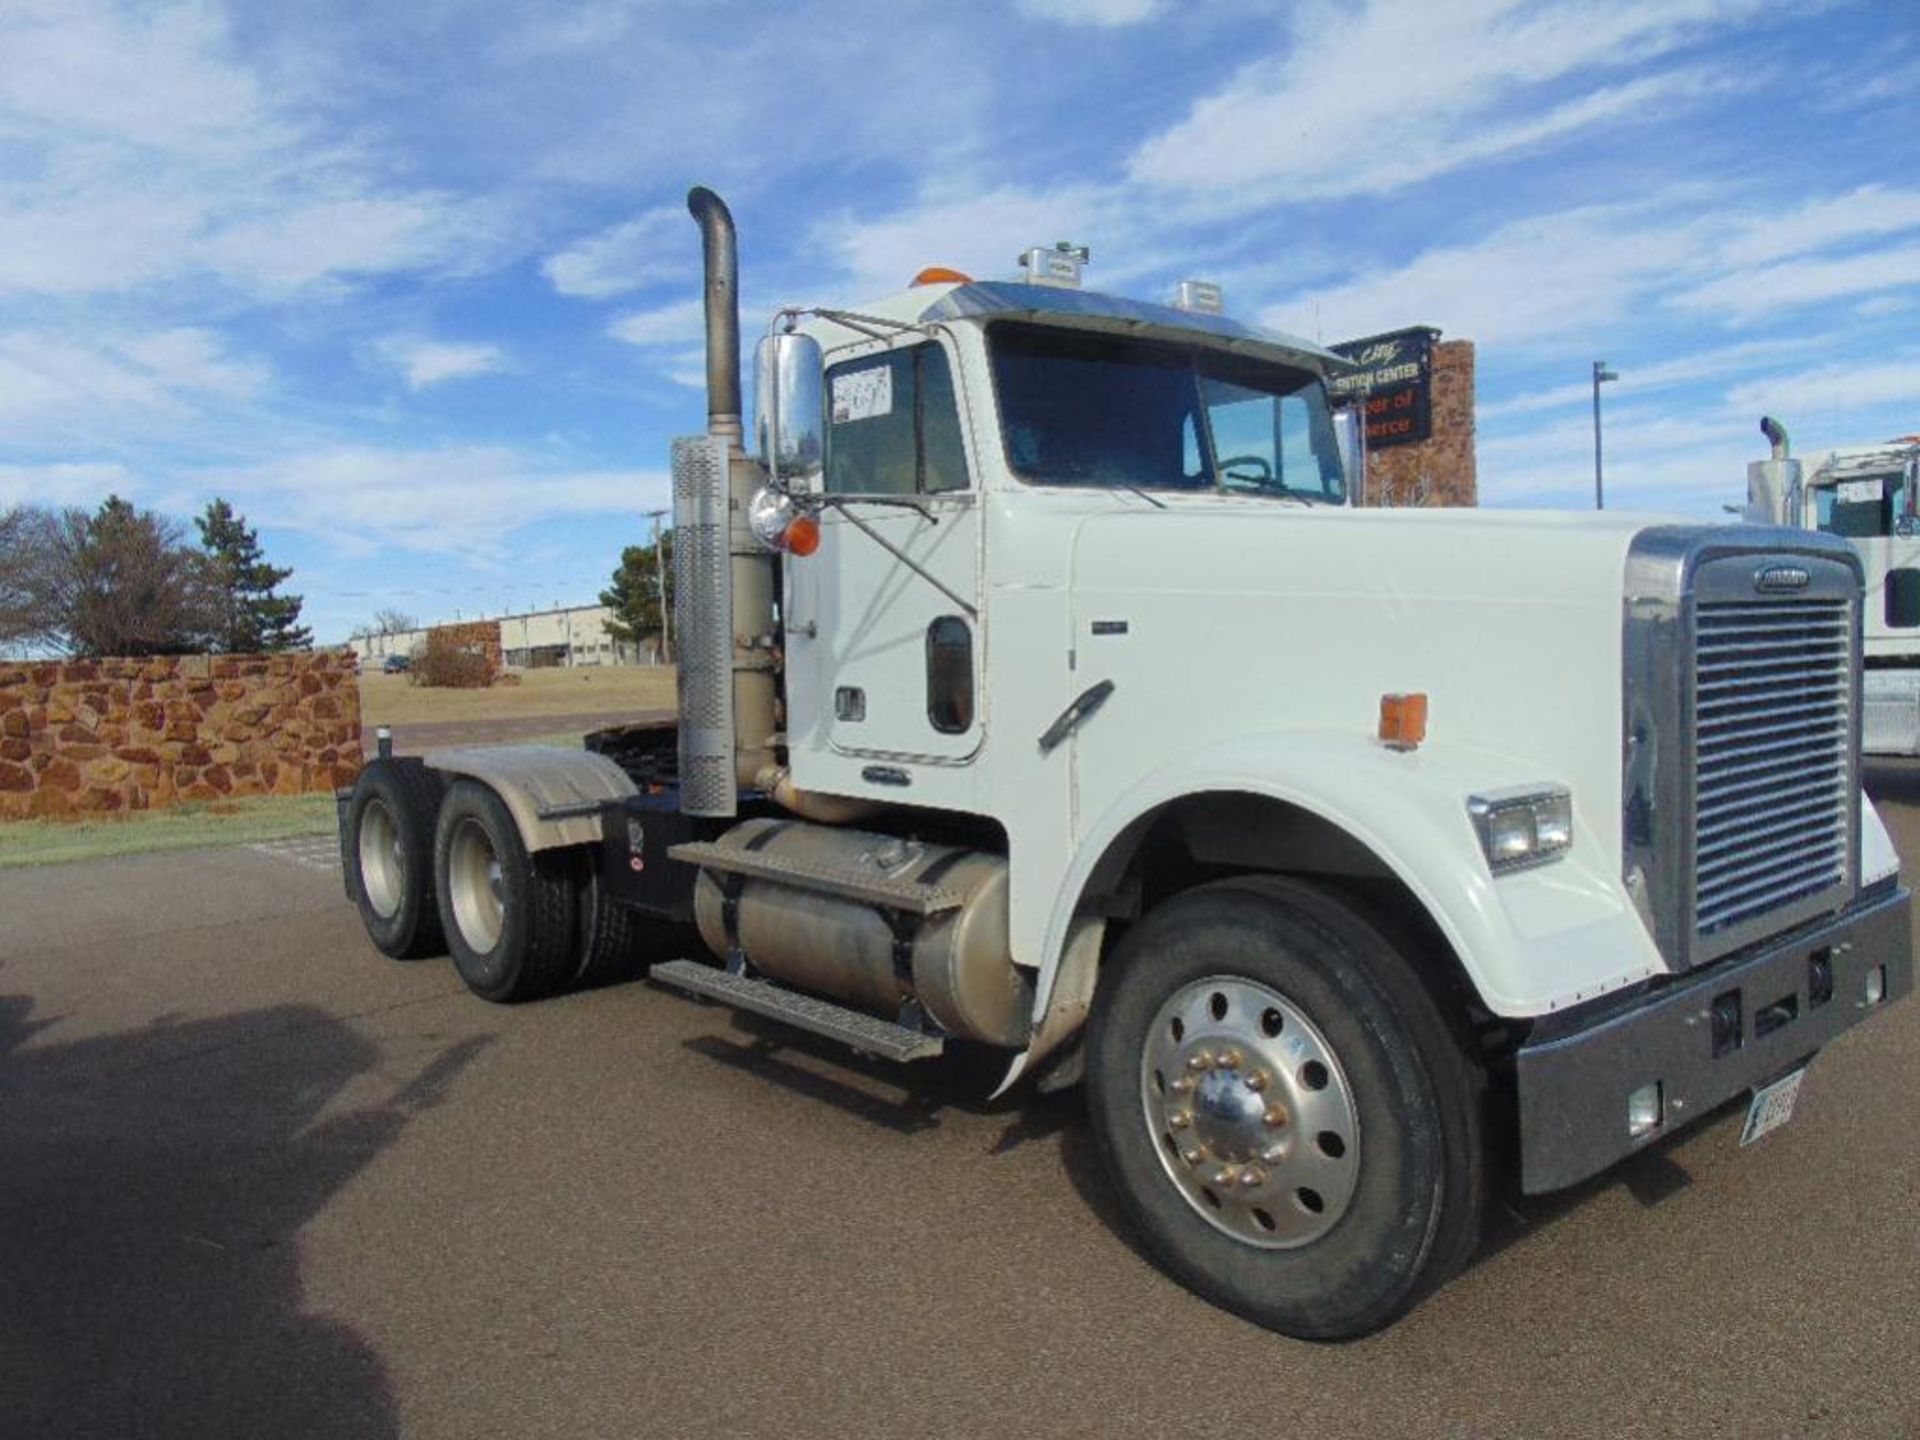 2009 Freightliner FLD120SD t/a Truck Tractor s/n 1fujalcv39dak0142, mercedes eng,10 spd trans,a/r - Image 3 of 3